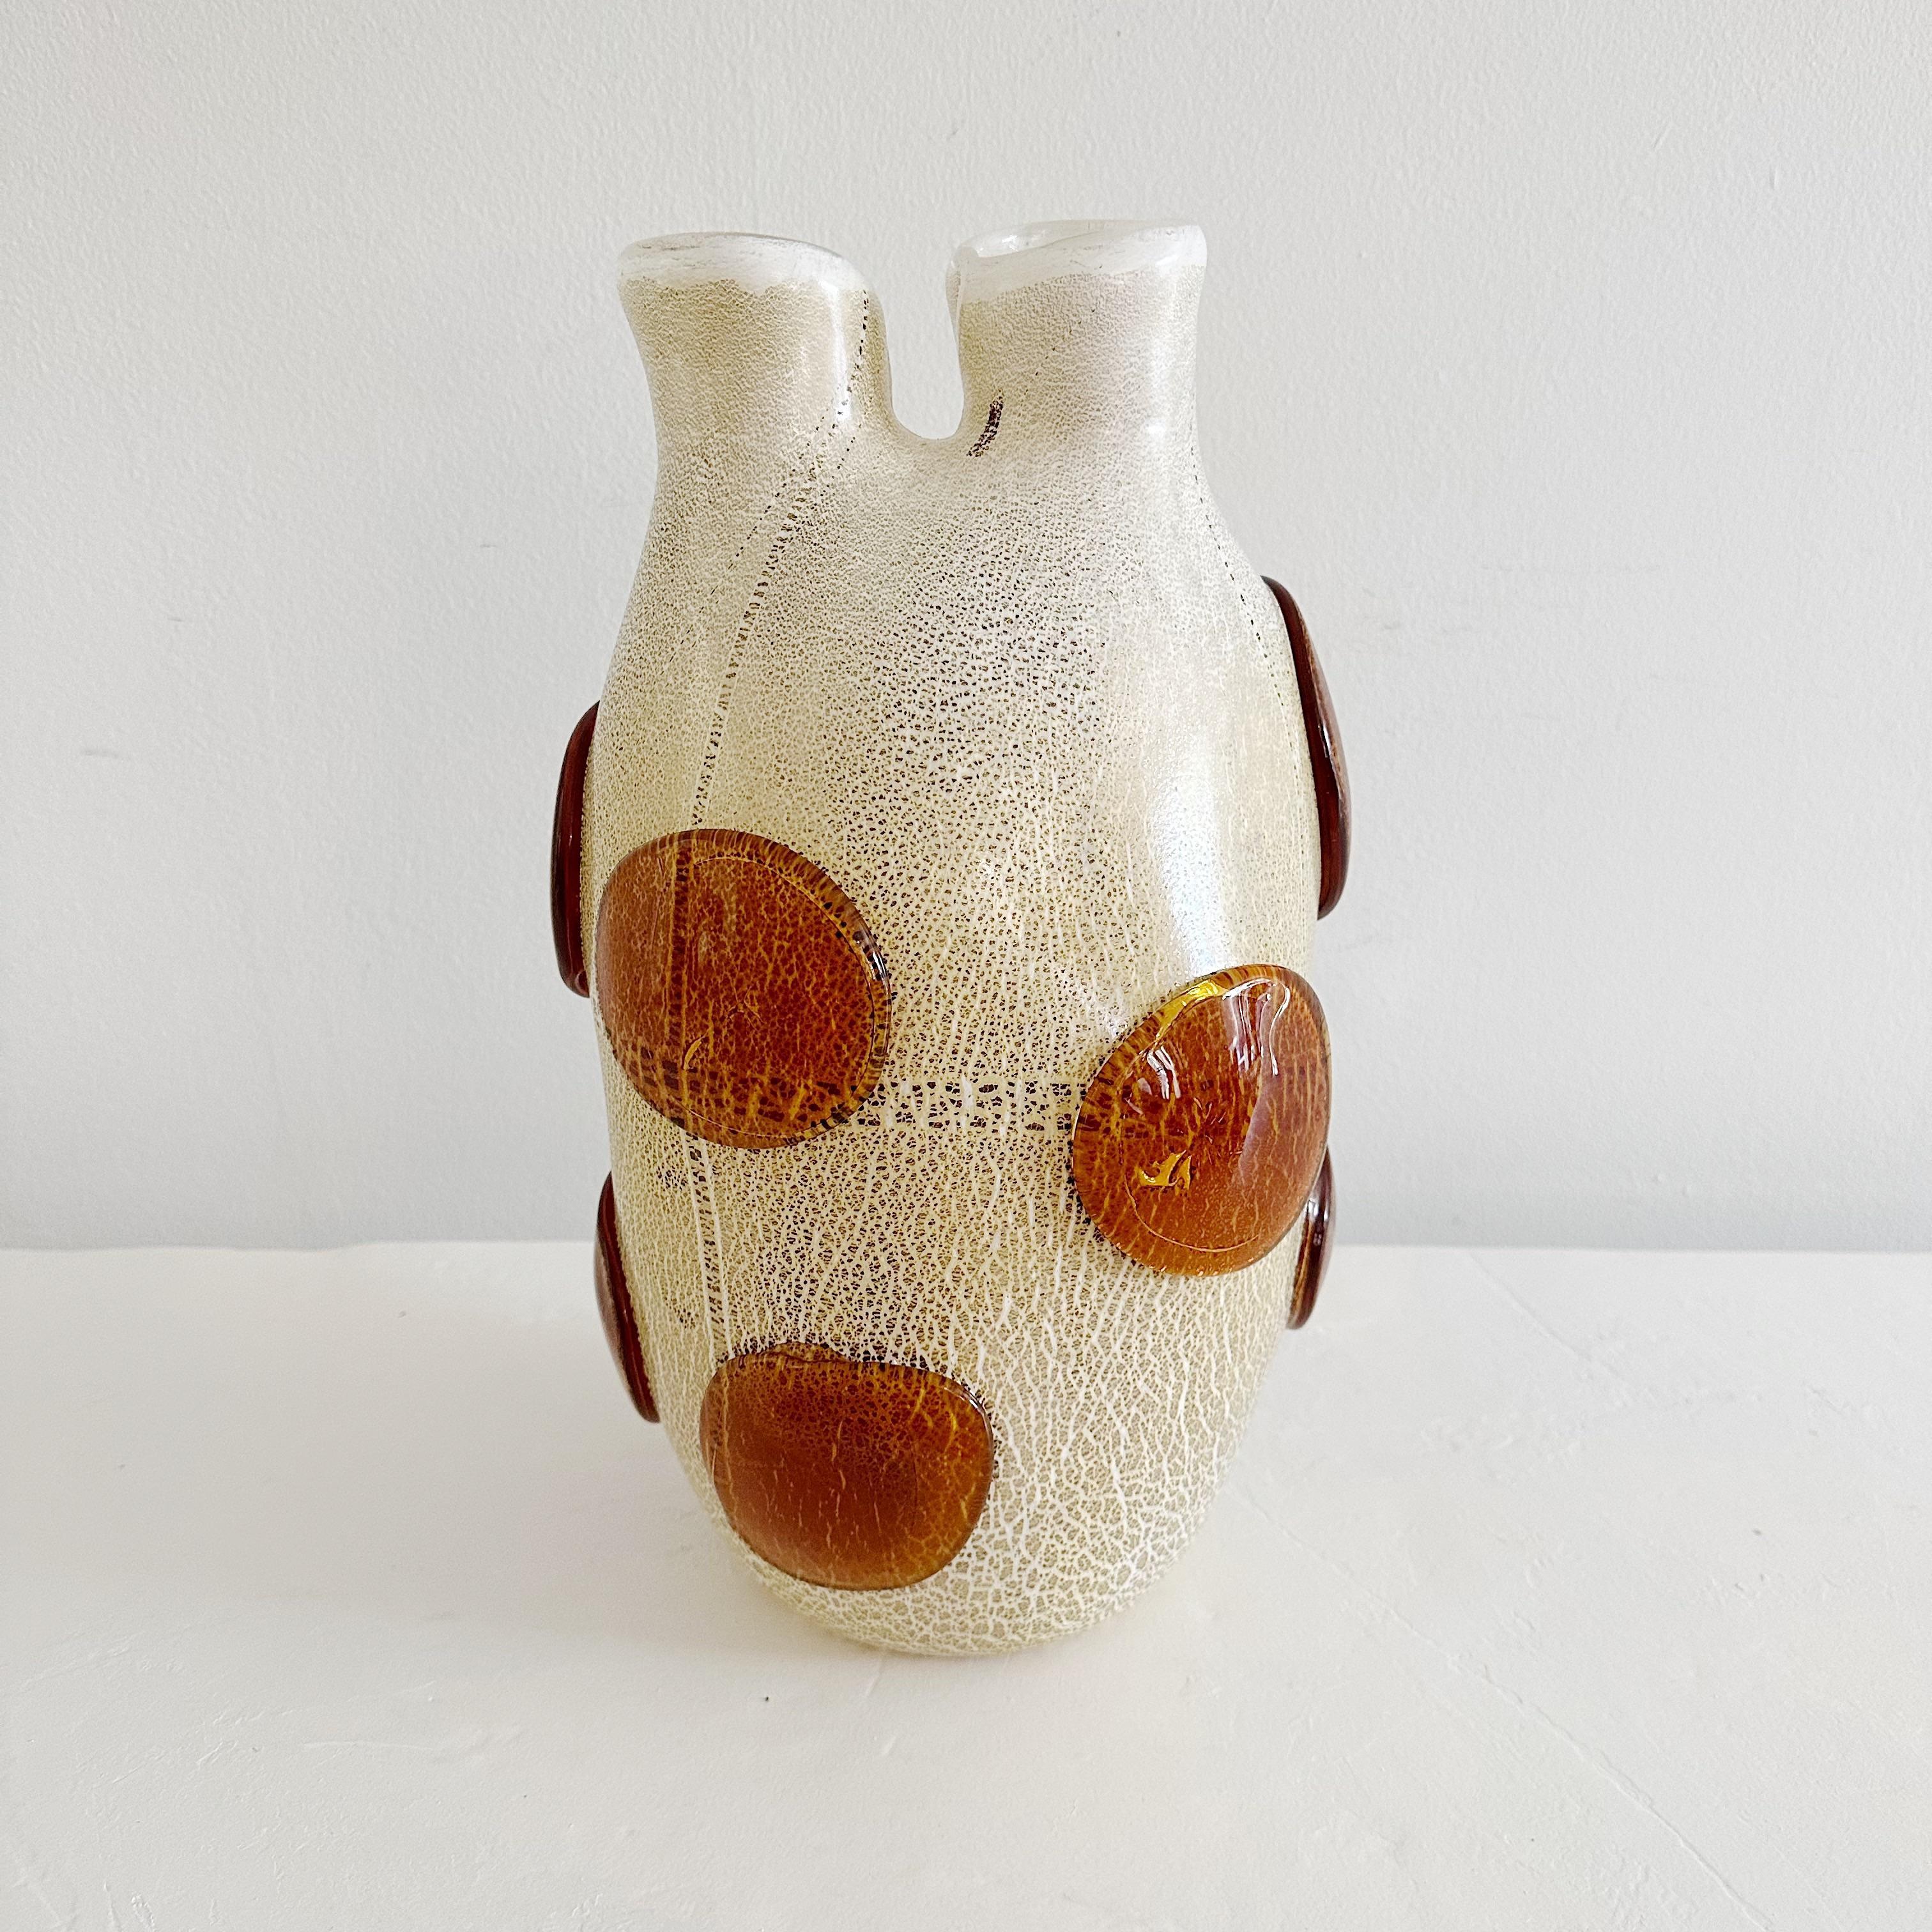 Rare double neck Murano glass Vase by Constantini from the 1980's The cream and white and gold fleck body is decorated with round Amber colored freeform reliefs. Signed on underside 